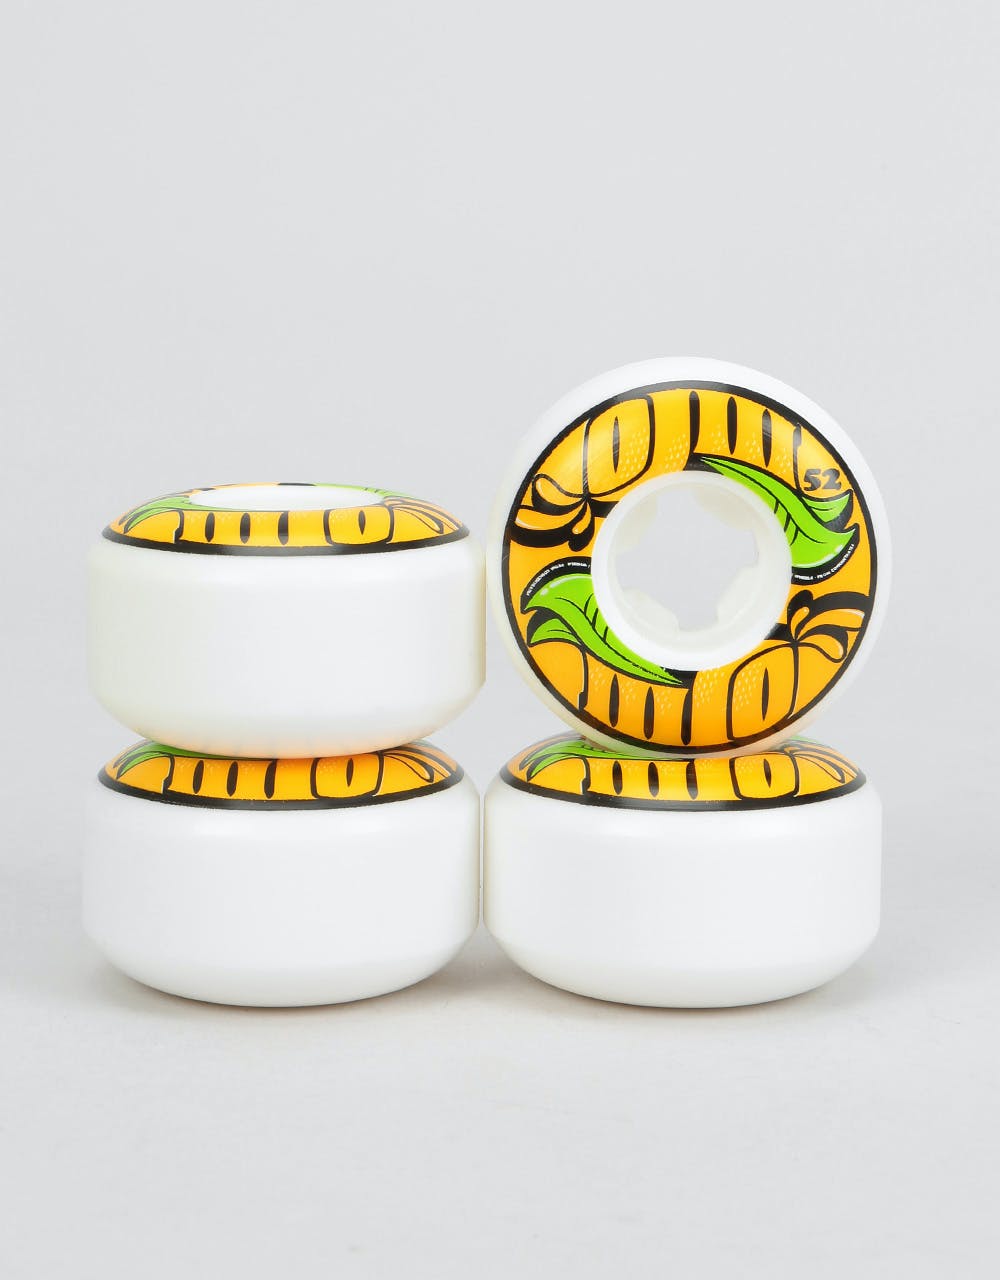 OJ From Concentrate EZ Edge 101a Skateboard Wheel - 52mm